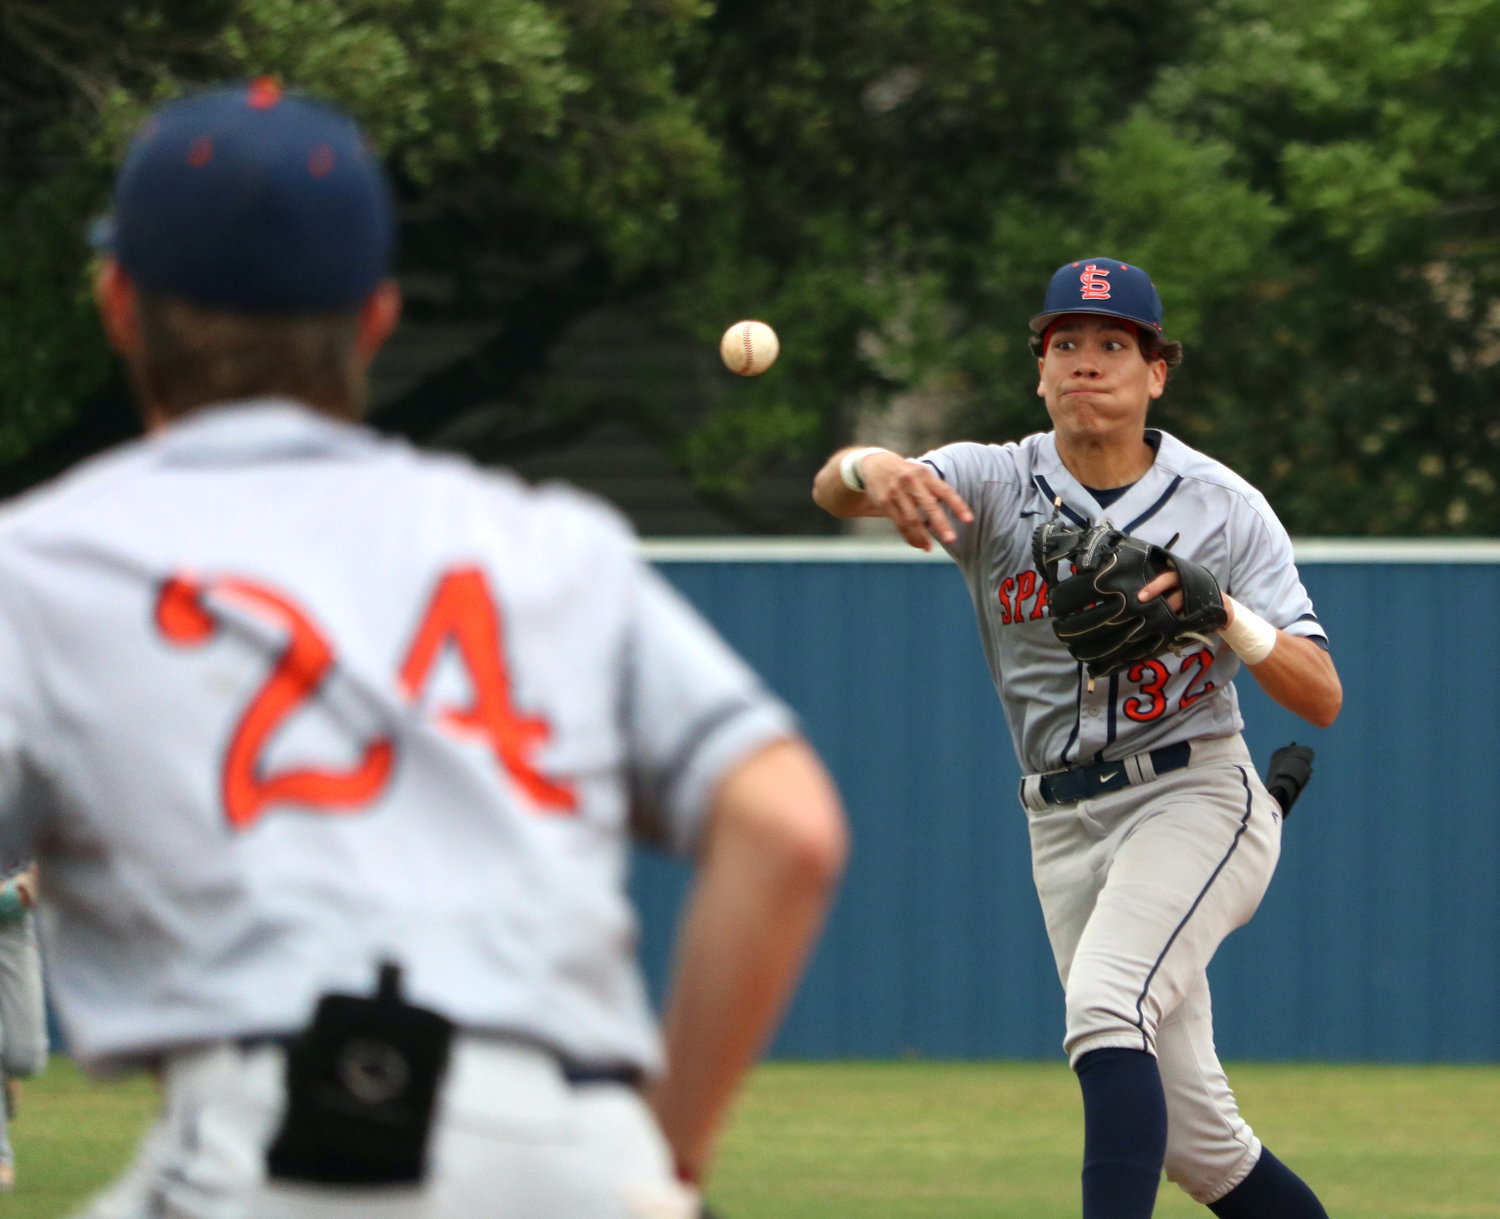 Miguel Acosta throws a ball to first place during Thursday's game between Taylor and Seven Lakes at the Taylor baseball field.